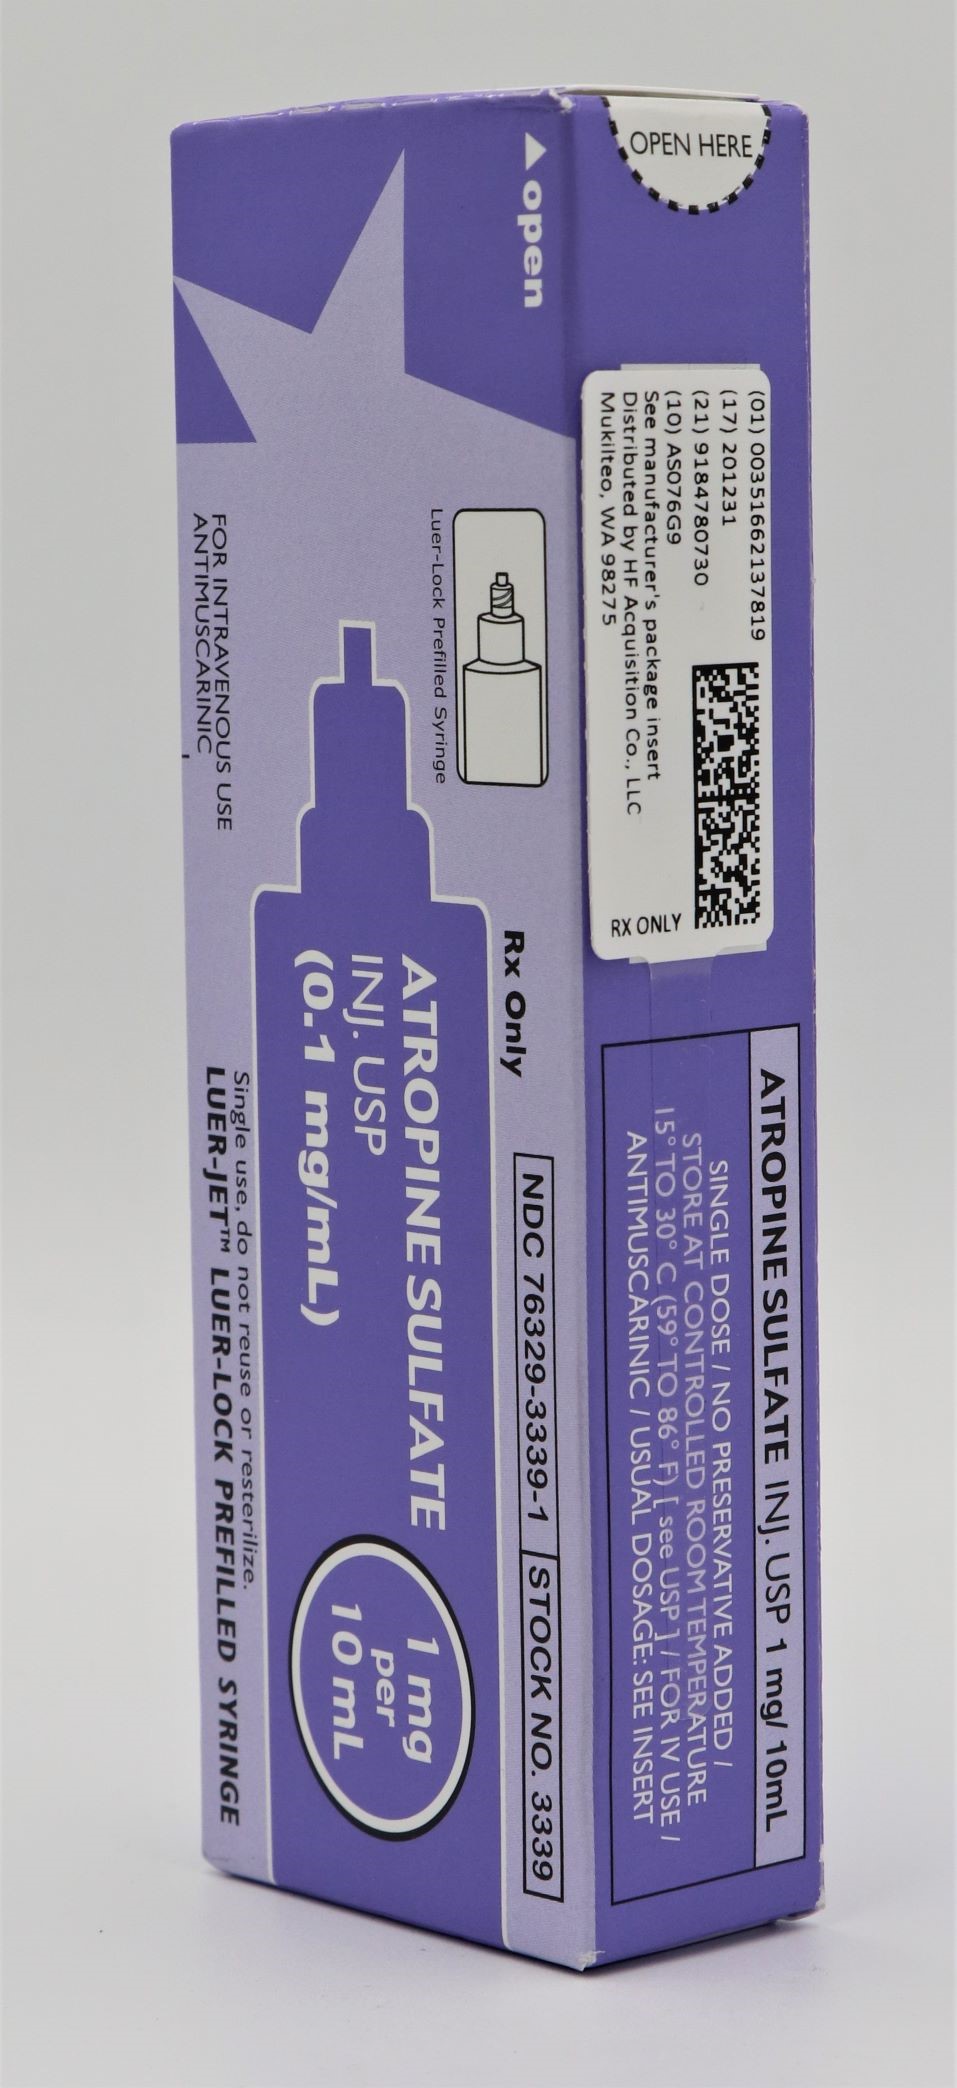 SERIALIZED BOX LABELING